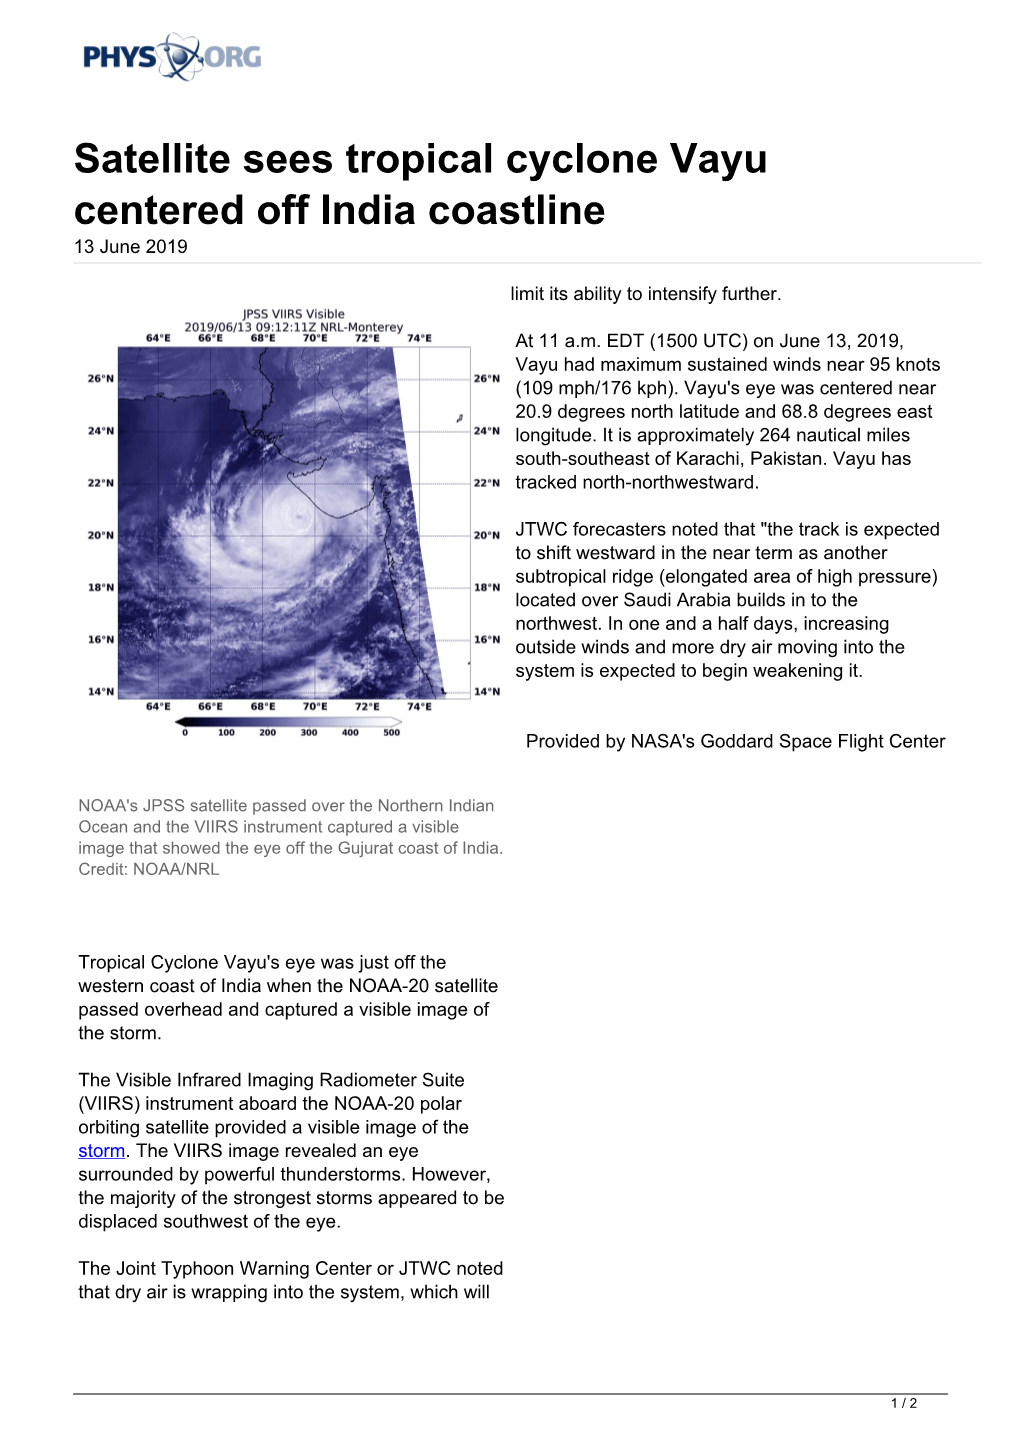 Satellite Sees Tropical Cyclone Vayu Centered Off India Coastline 13 June 2019